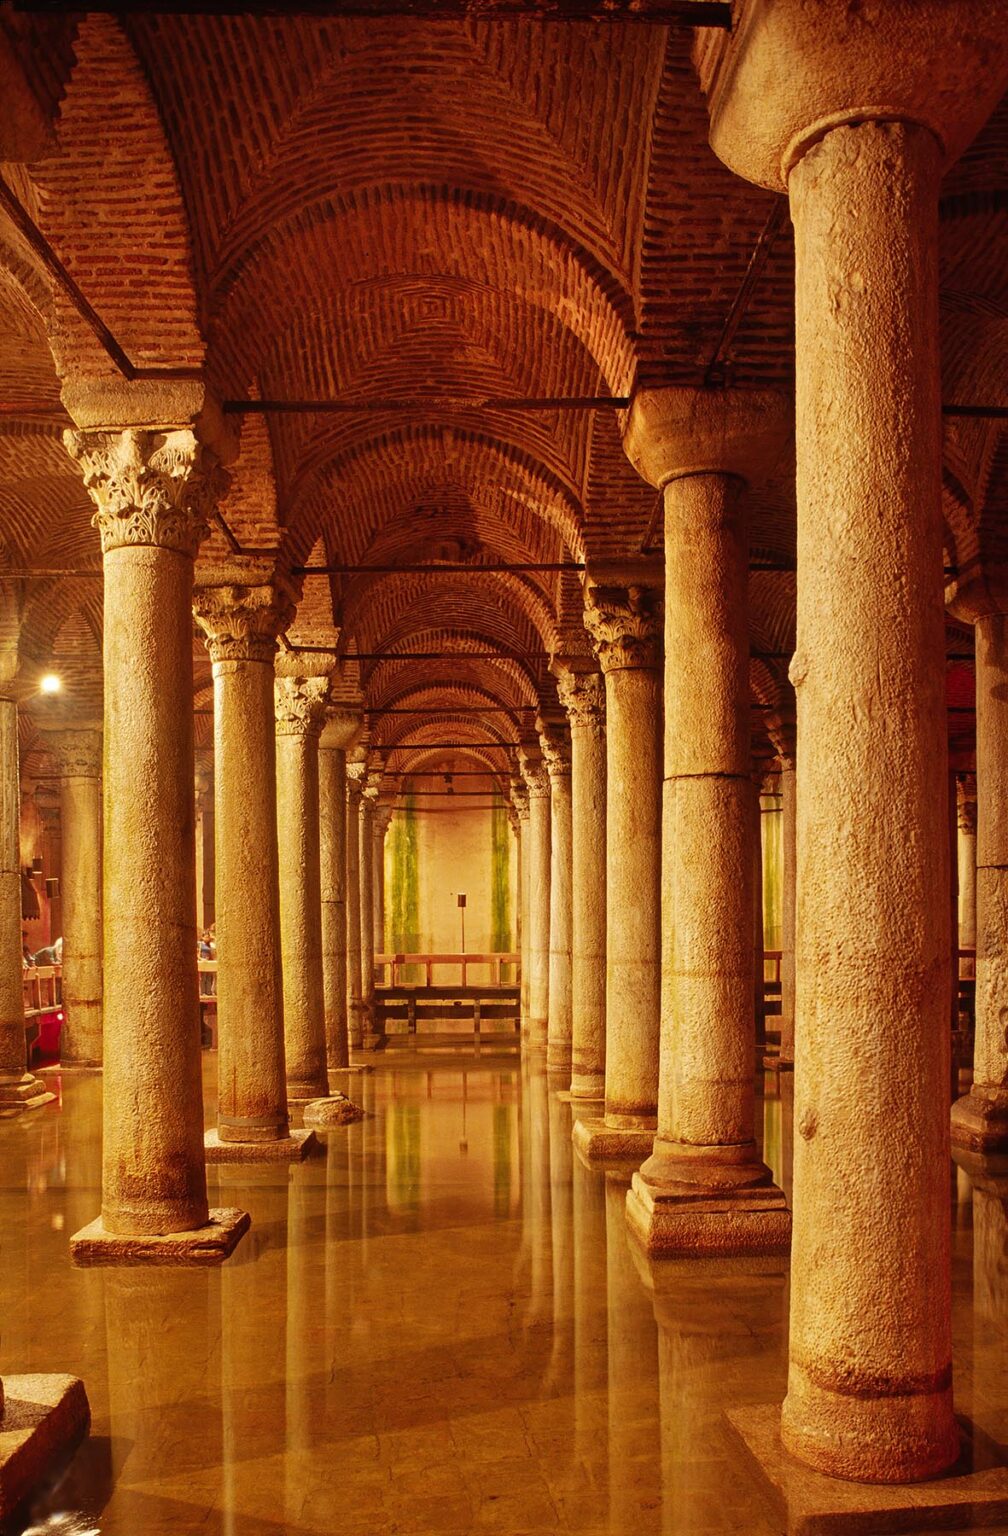 The UNDERGROUND CISTERN was originally built in 532 AD by Justian to store water for the Emperors Palace - Istanbul, Turkey